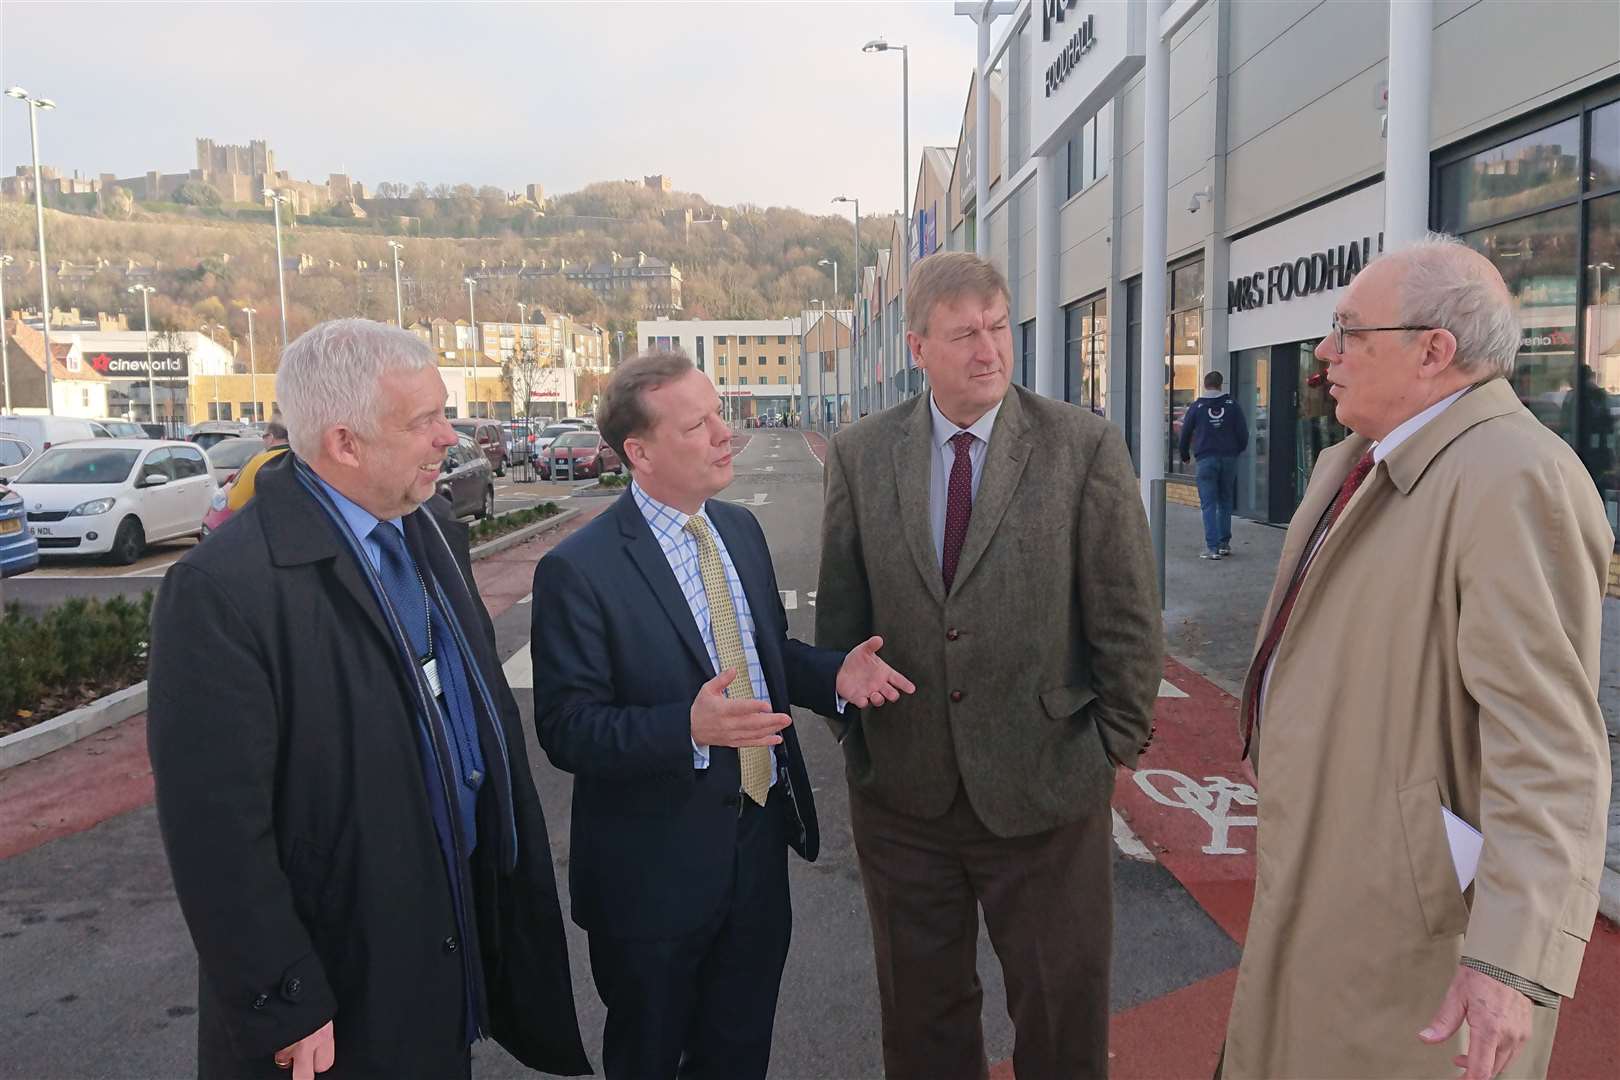 Tim Ingleton, Charlie Elphicke, Keith Morris and Graham Galpin at St James' in Dover, Picture: office of Charlie Elphicke MP